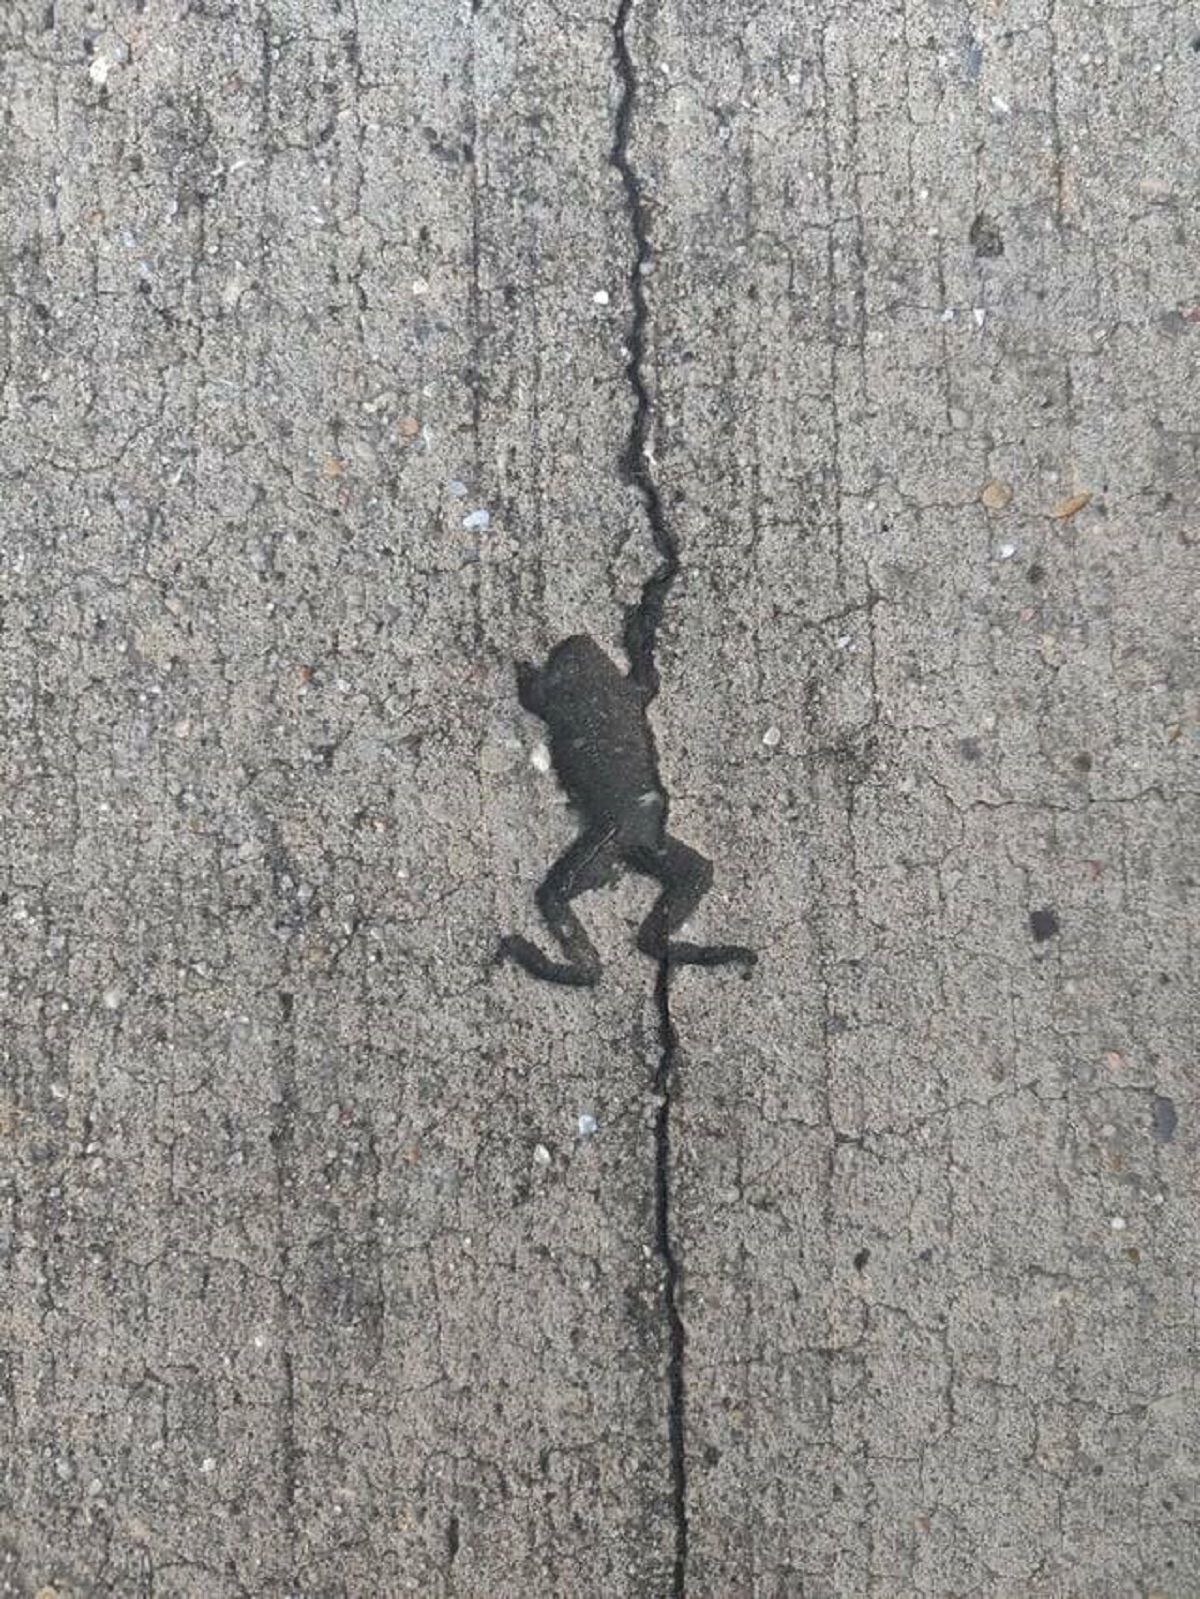 "This hole in the pavement looks just like a frog"